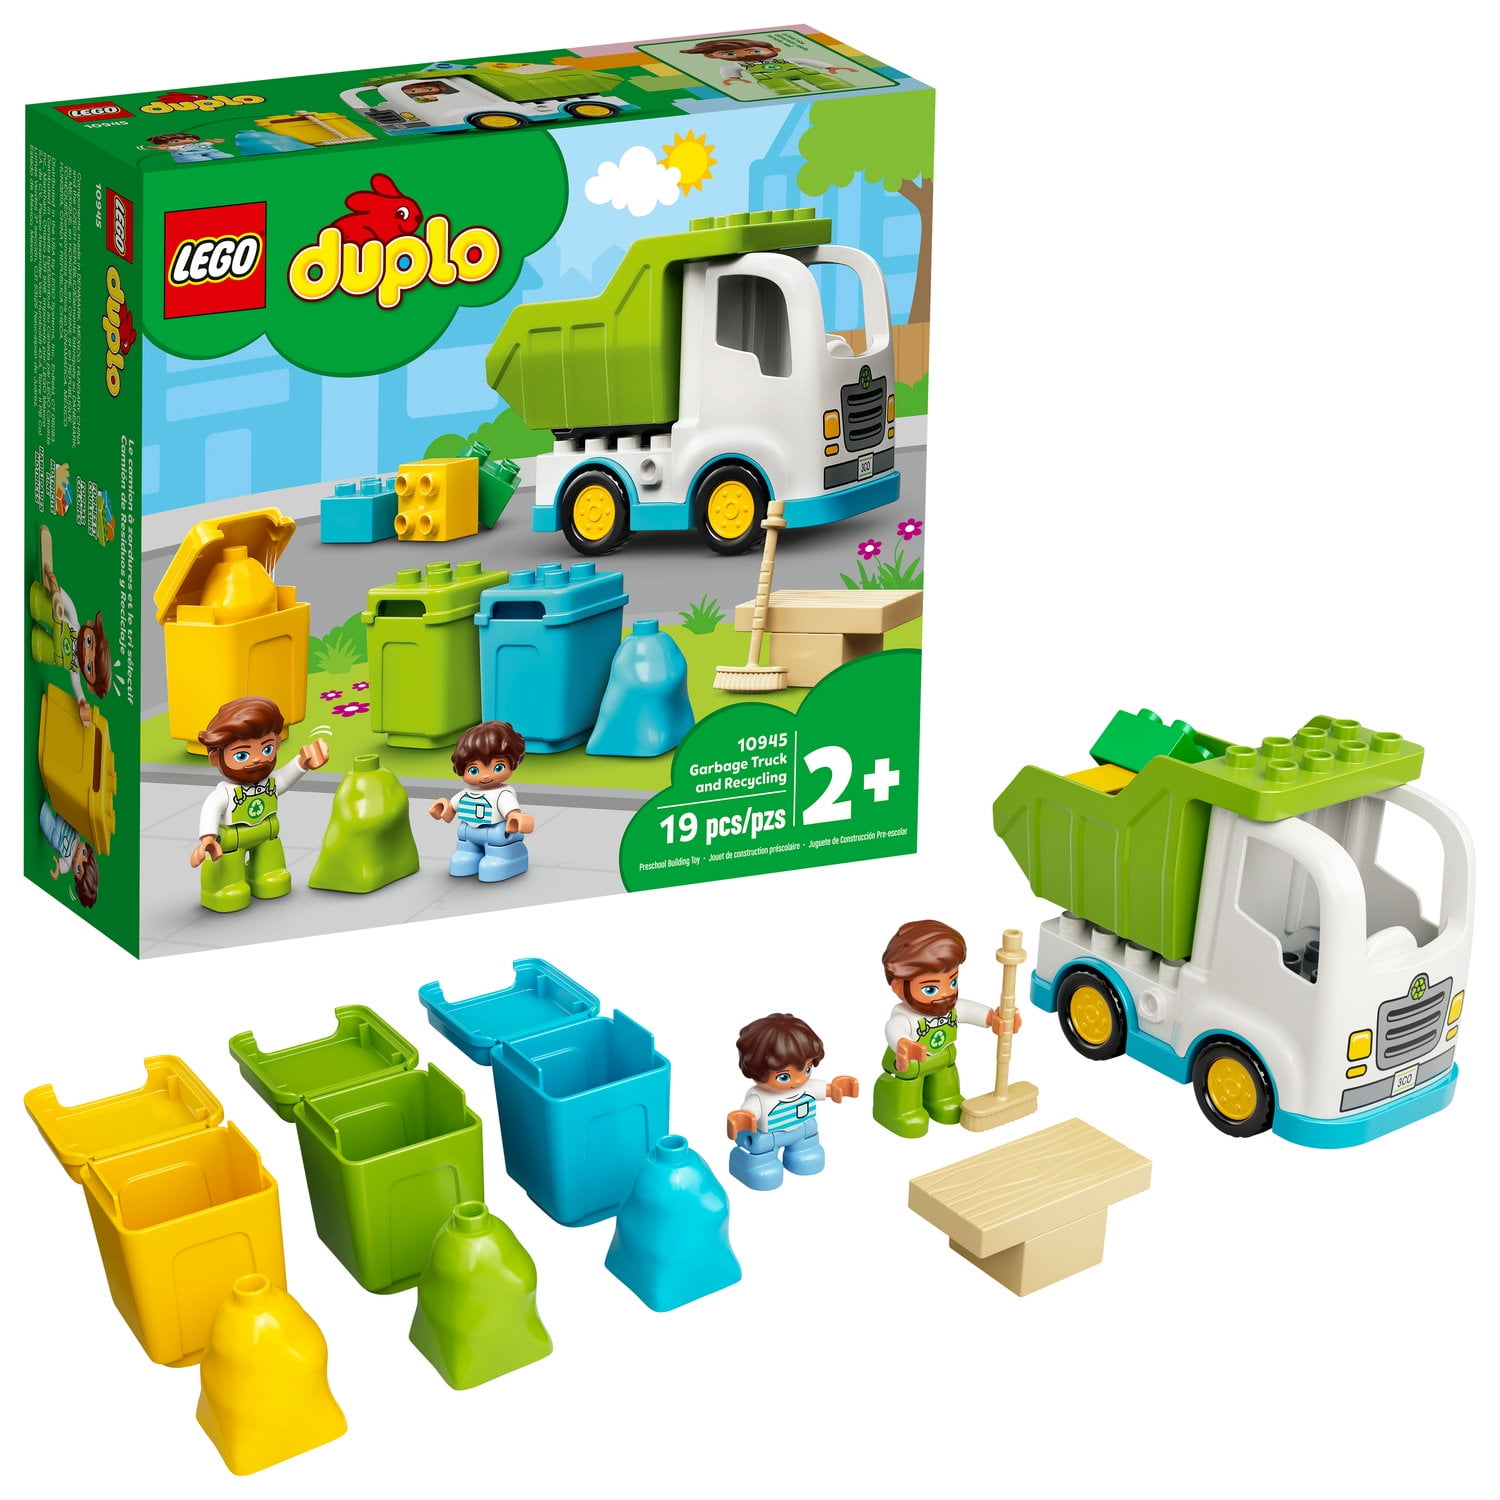 LEGO DUPLO Town Garbage Truck and Recycling 10945 Educational Building Toy For Toddlers and Kids (19 Pieces)